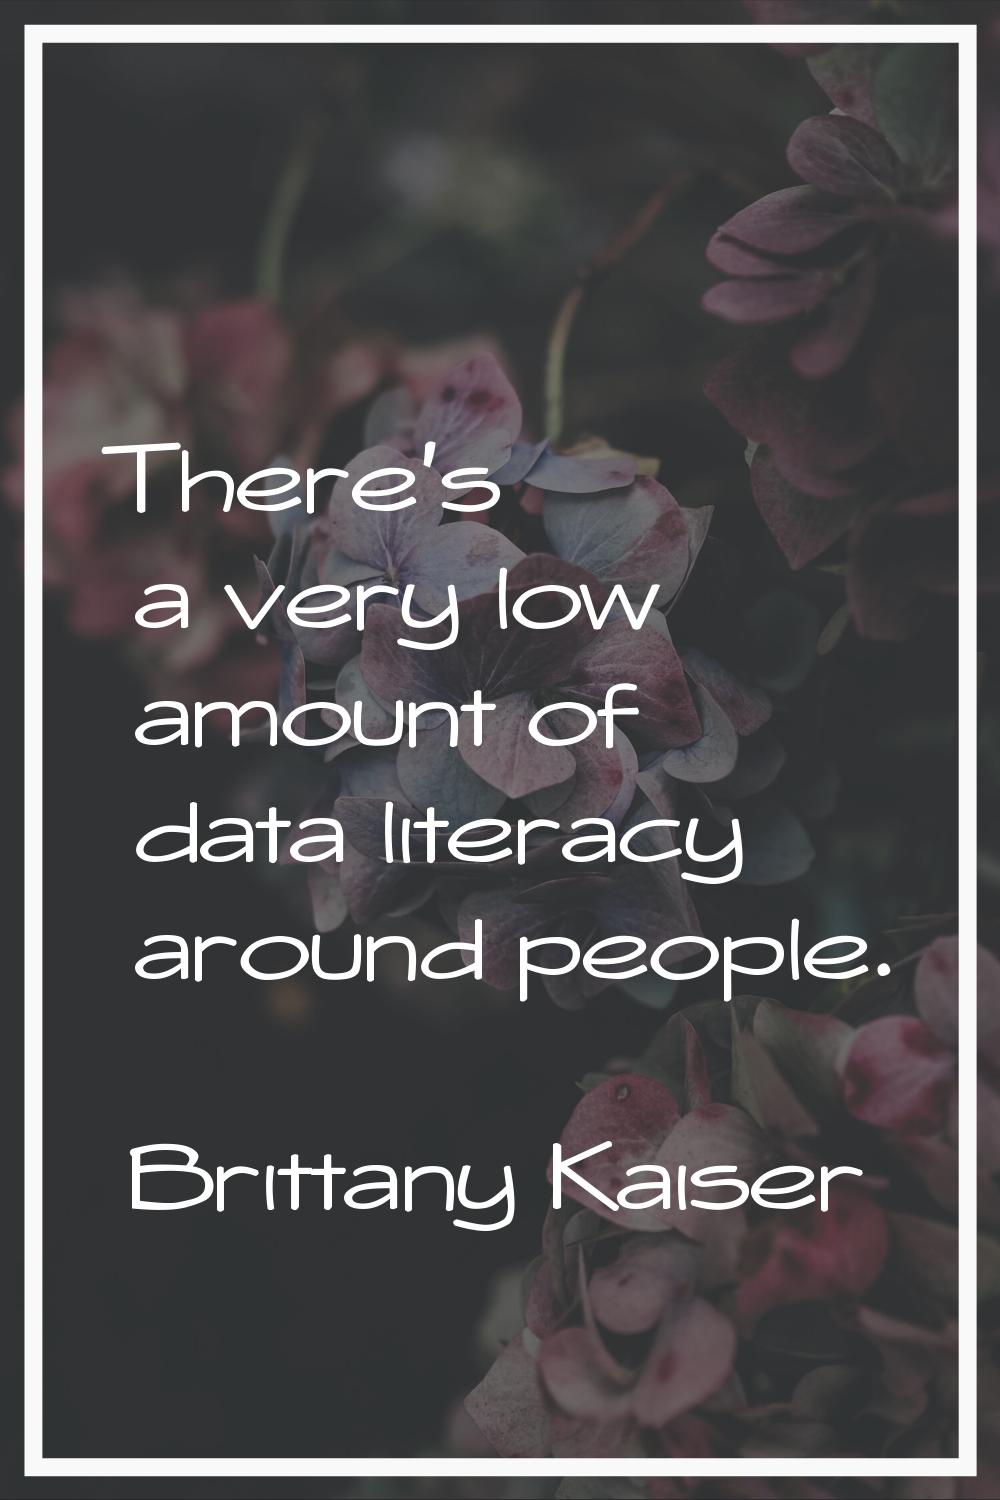 There's a very low amount of data literacy around people.